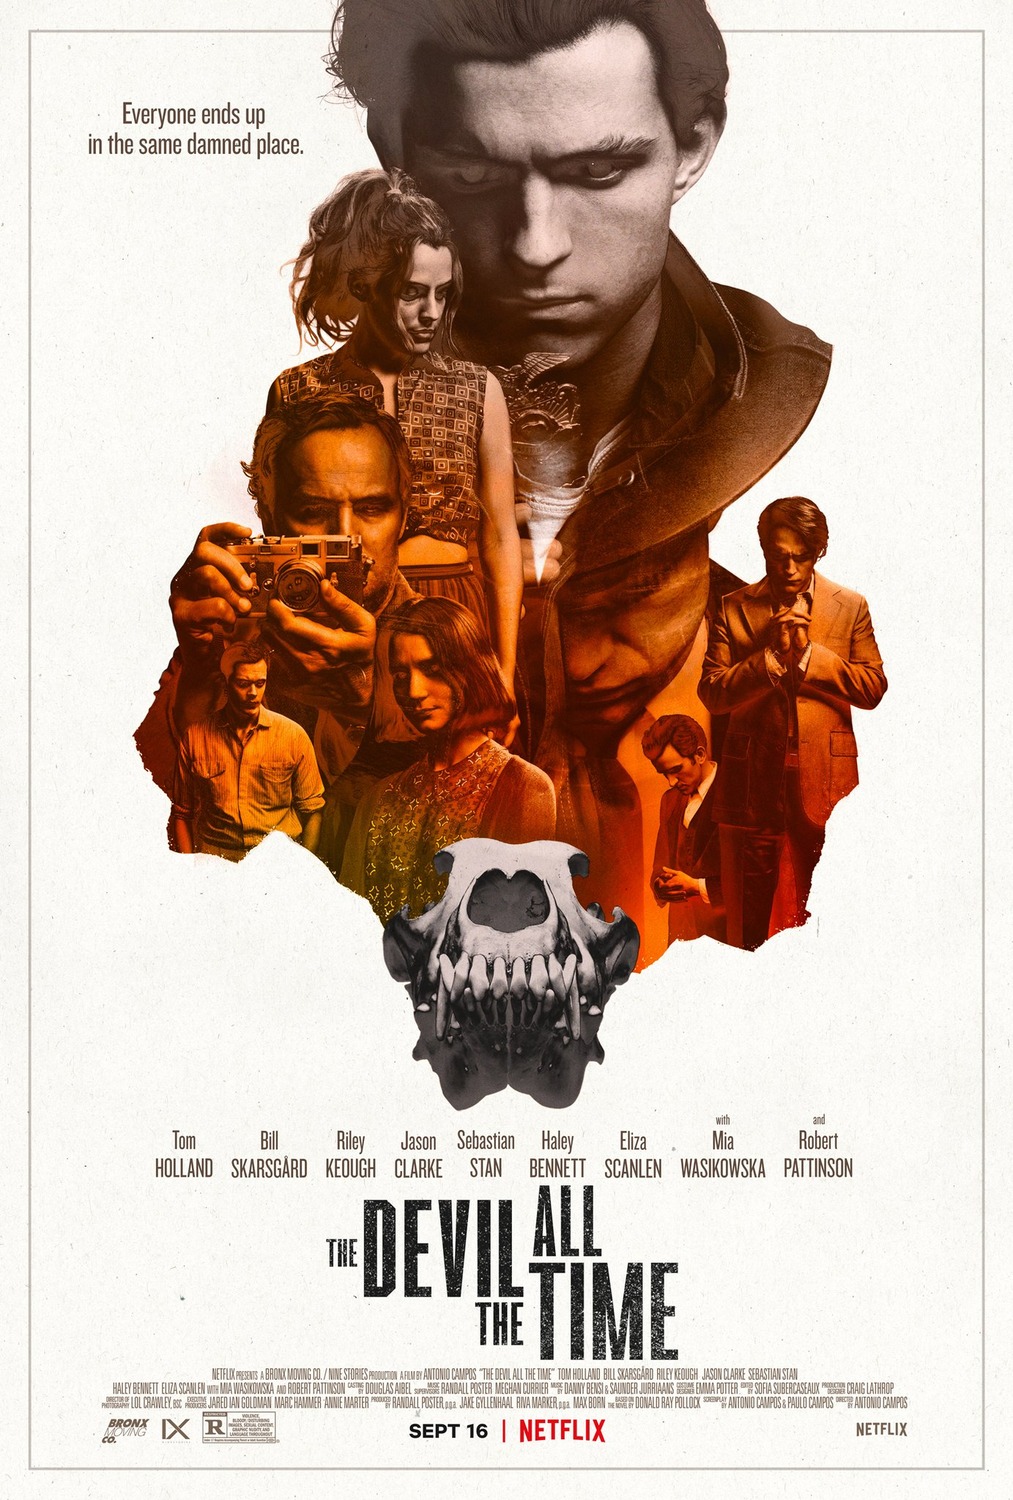 The Devil All the Time' drives a winding, complex story with grim